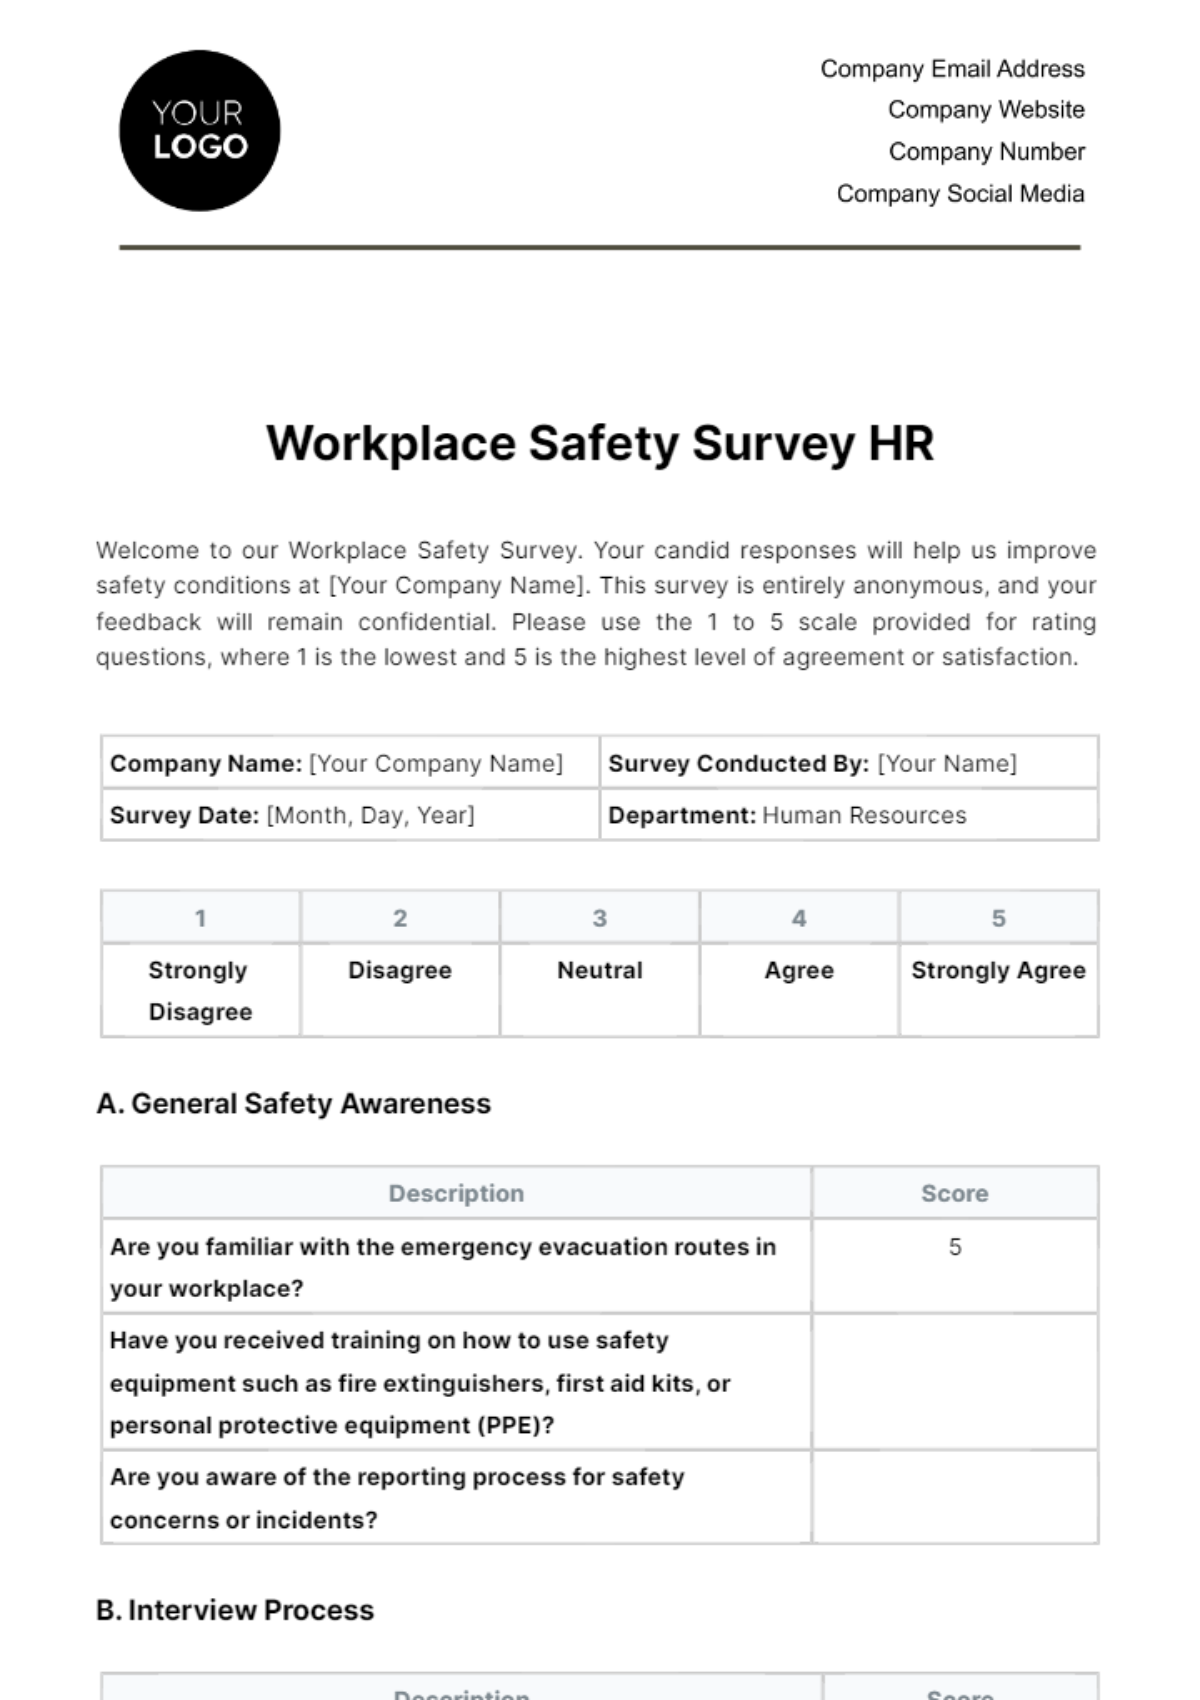 Free Workplace Safety Survey HR Template